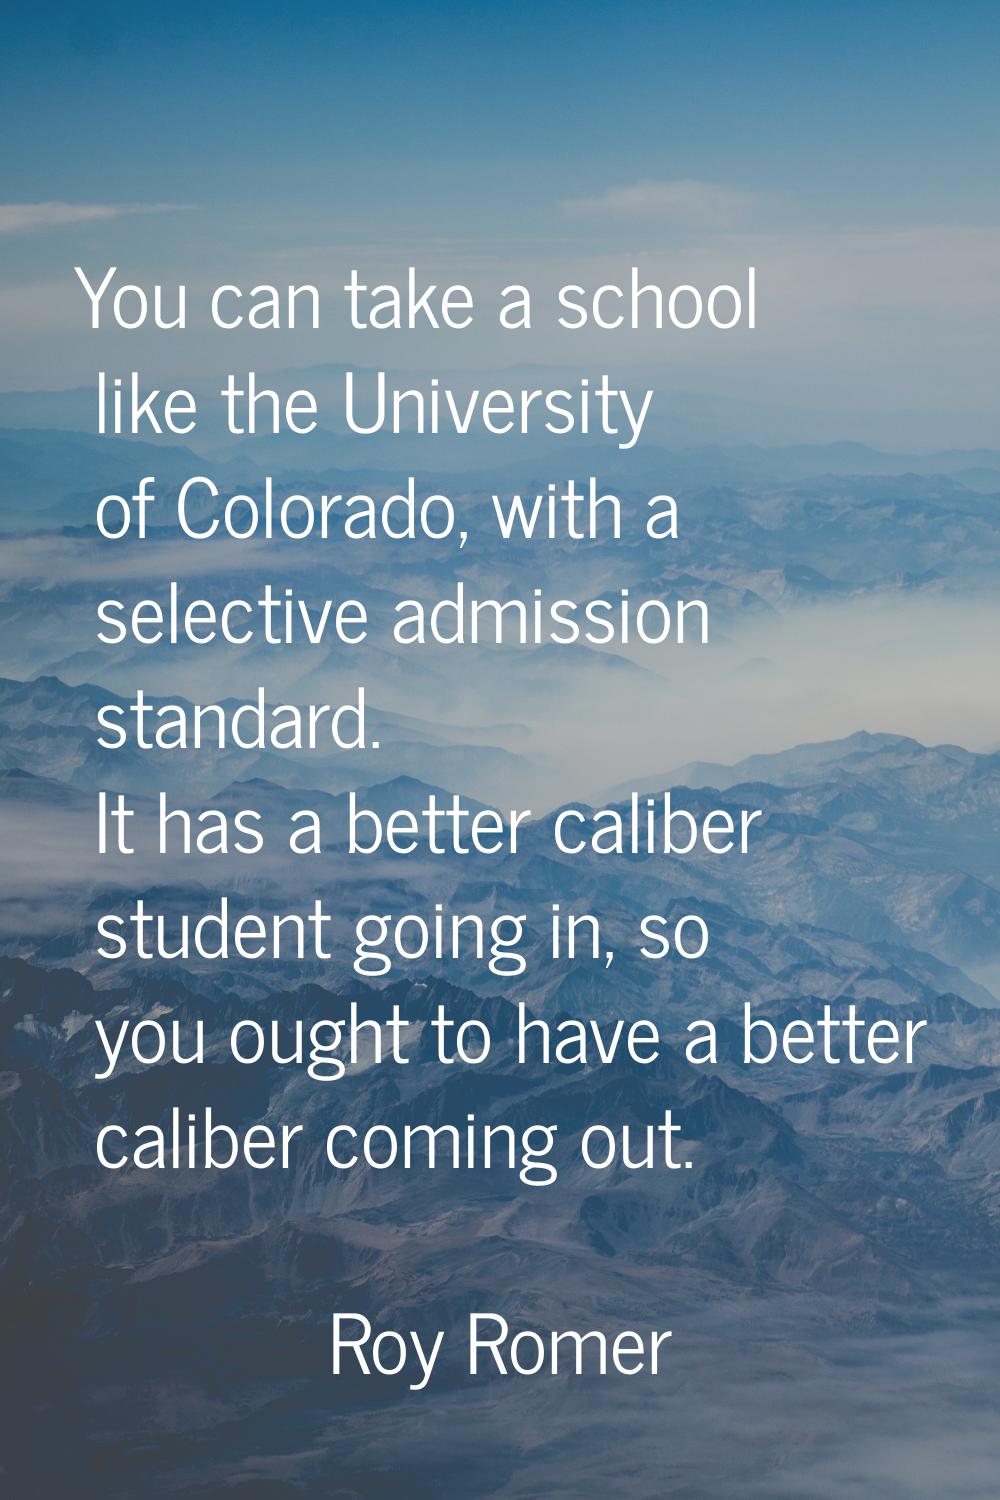 You can take a school like the University of Colorado, with a selective admission standard. It has 